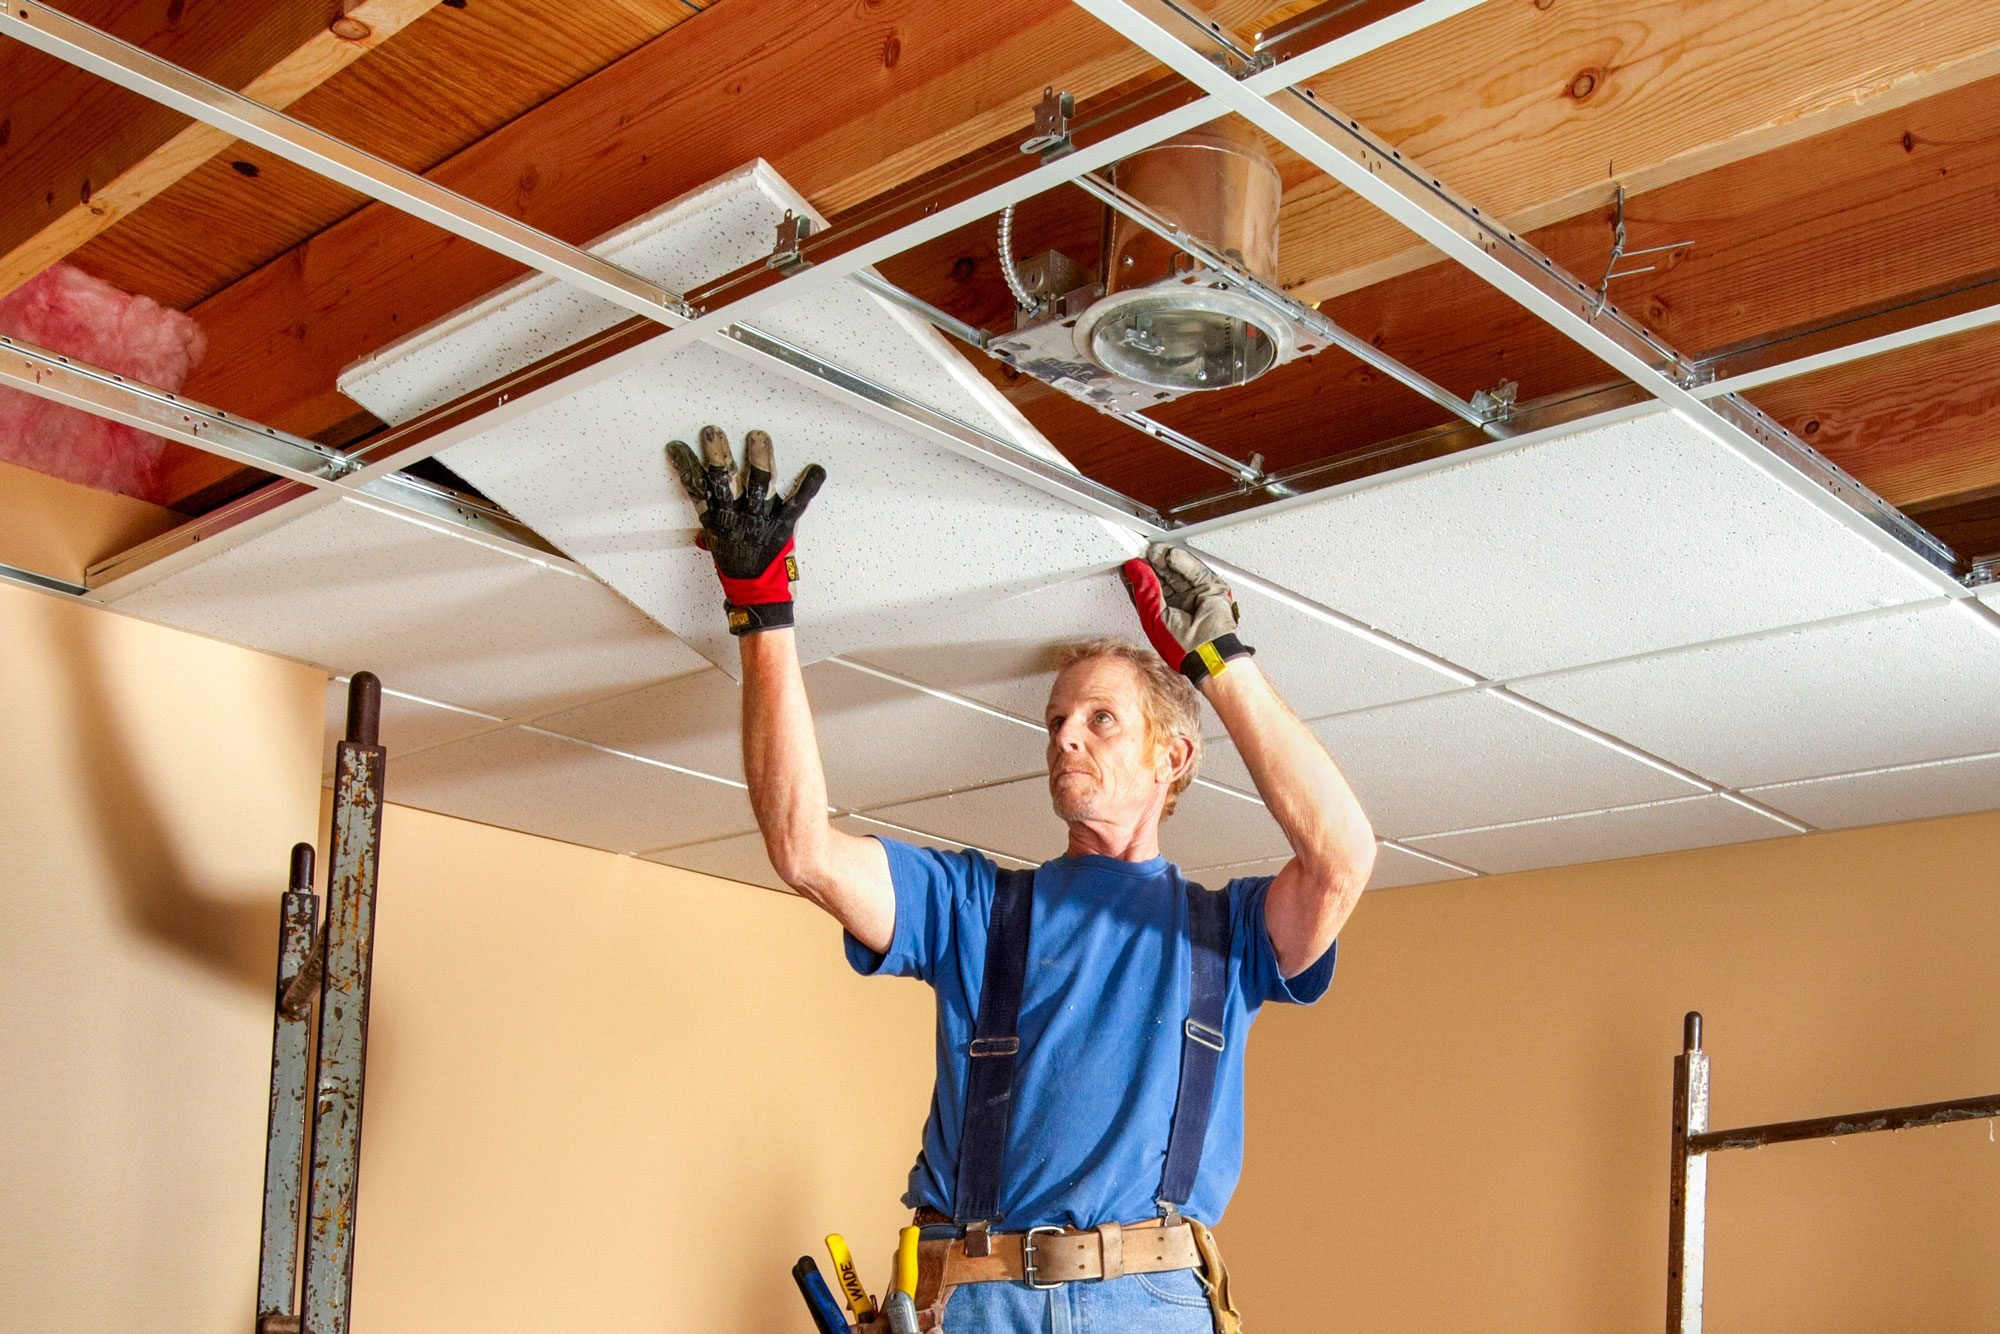 12 Drop Ceiling Installation Tips From A Pro Fh12jun 529 10 065 Ksedit Ft